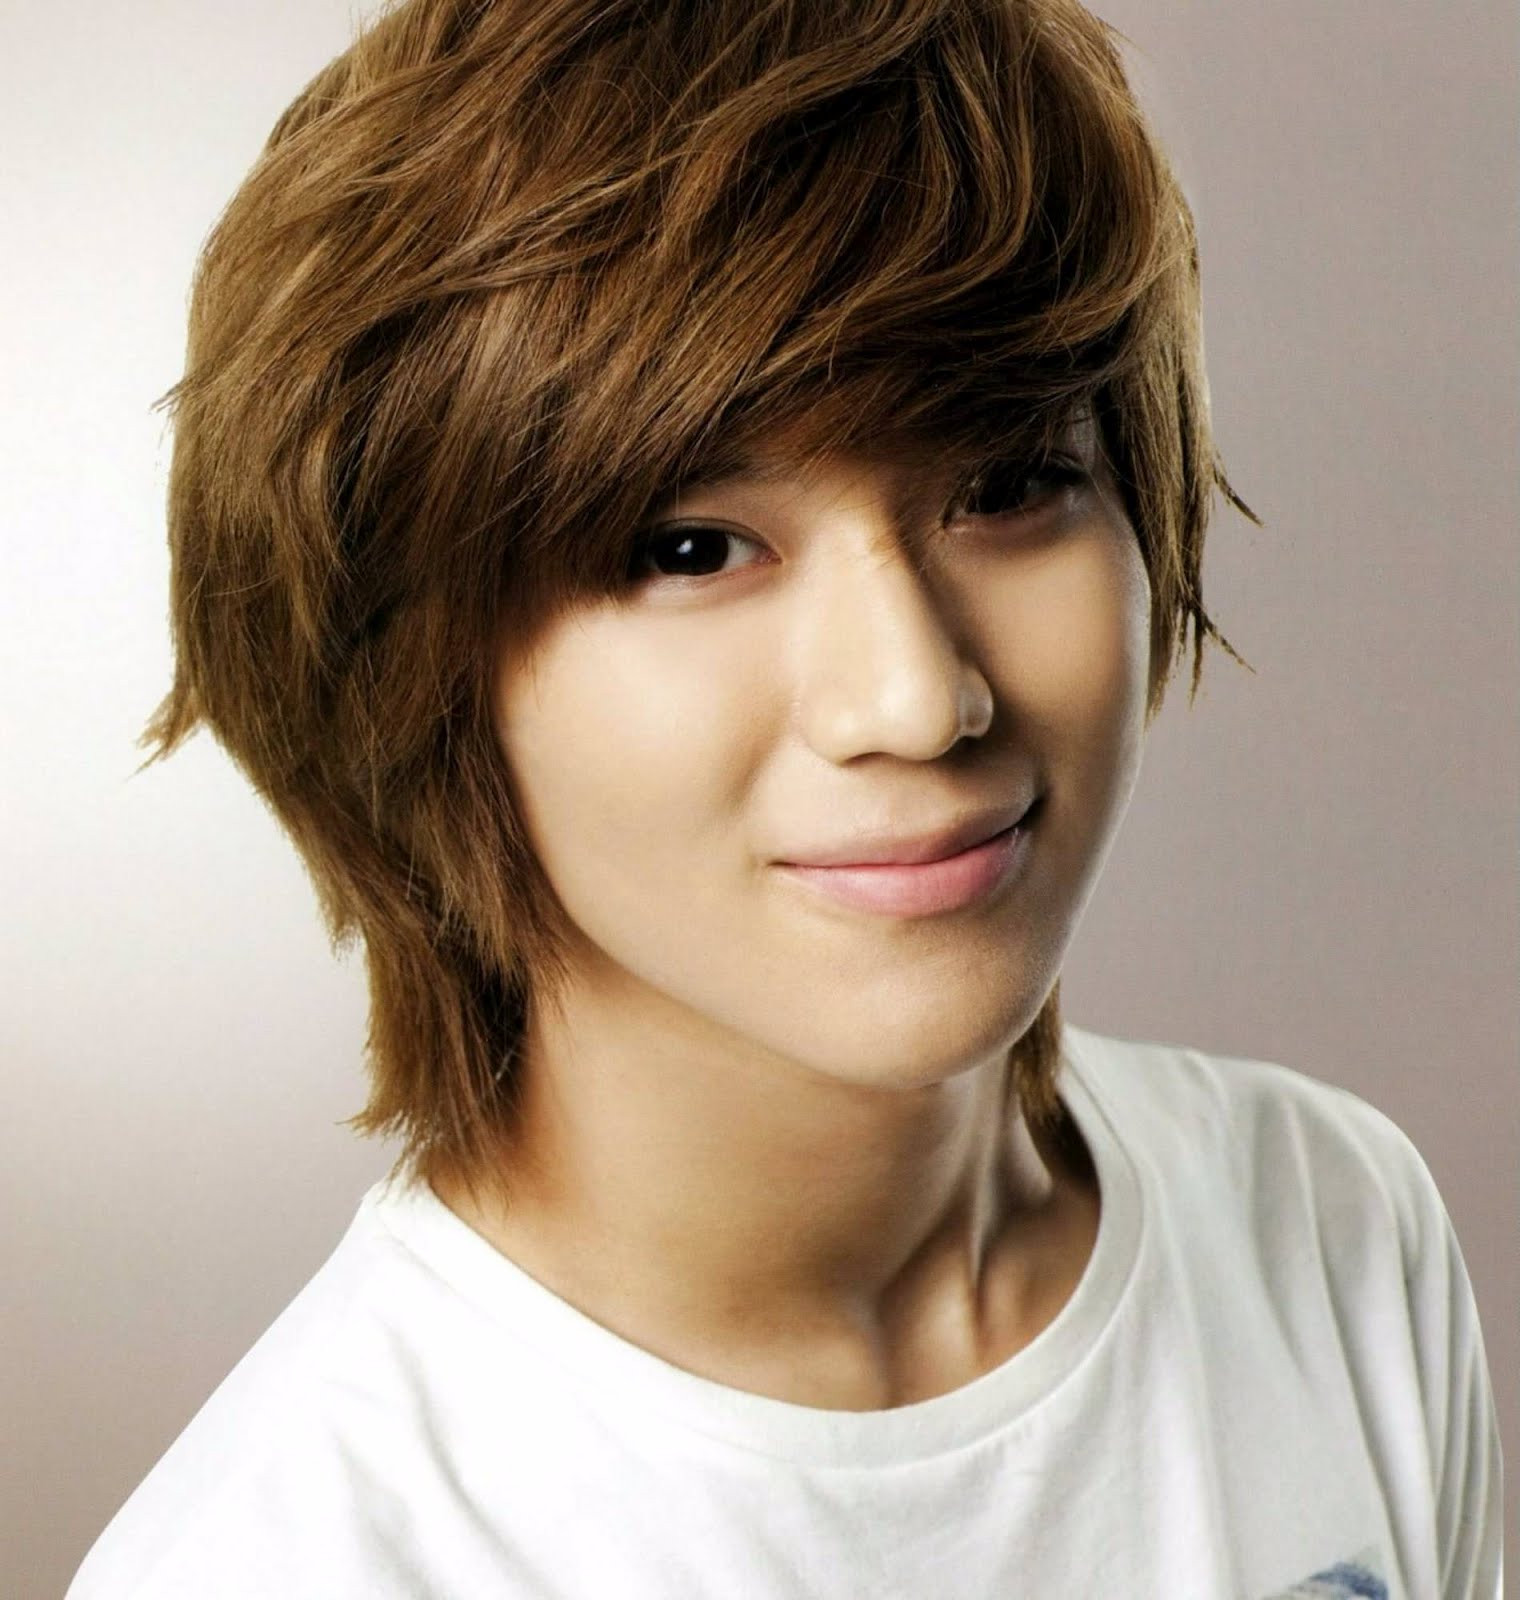 Male Kpop Hairstyles
 Latest Korean Hairstyles for Men 2013